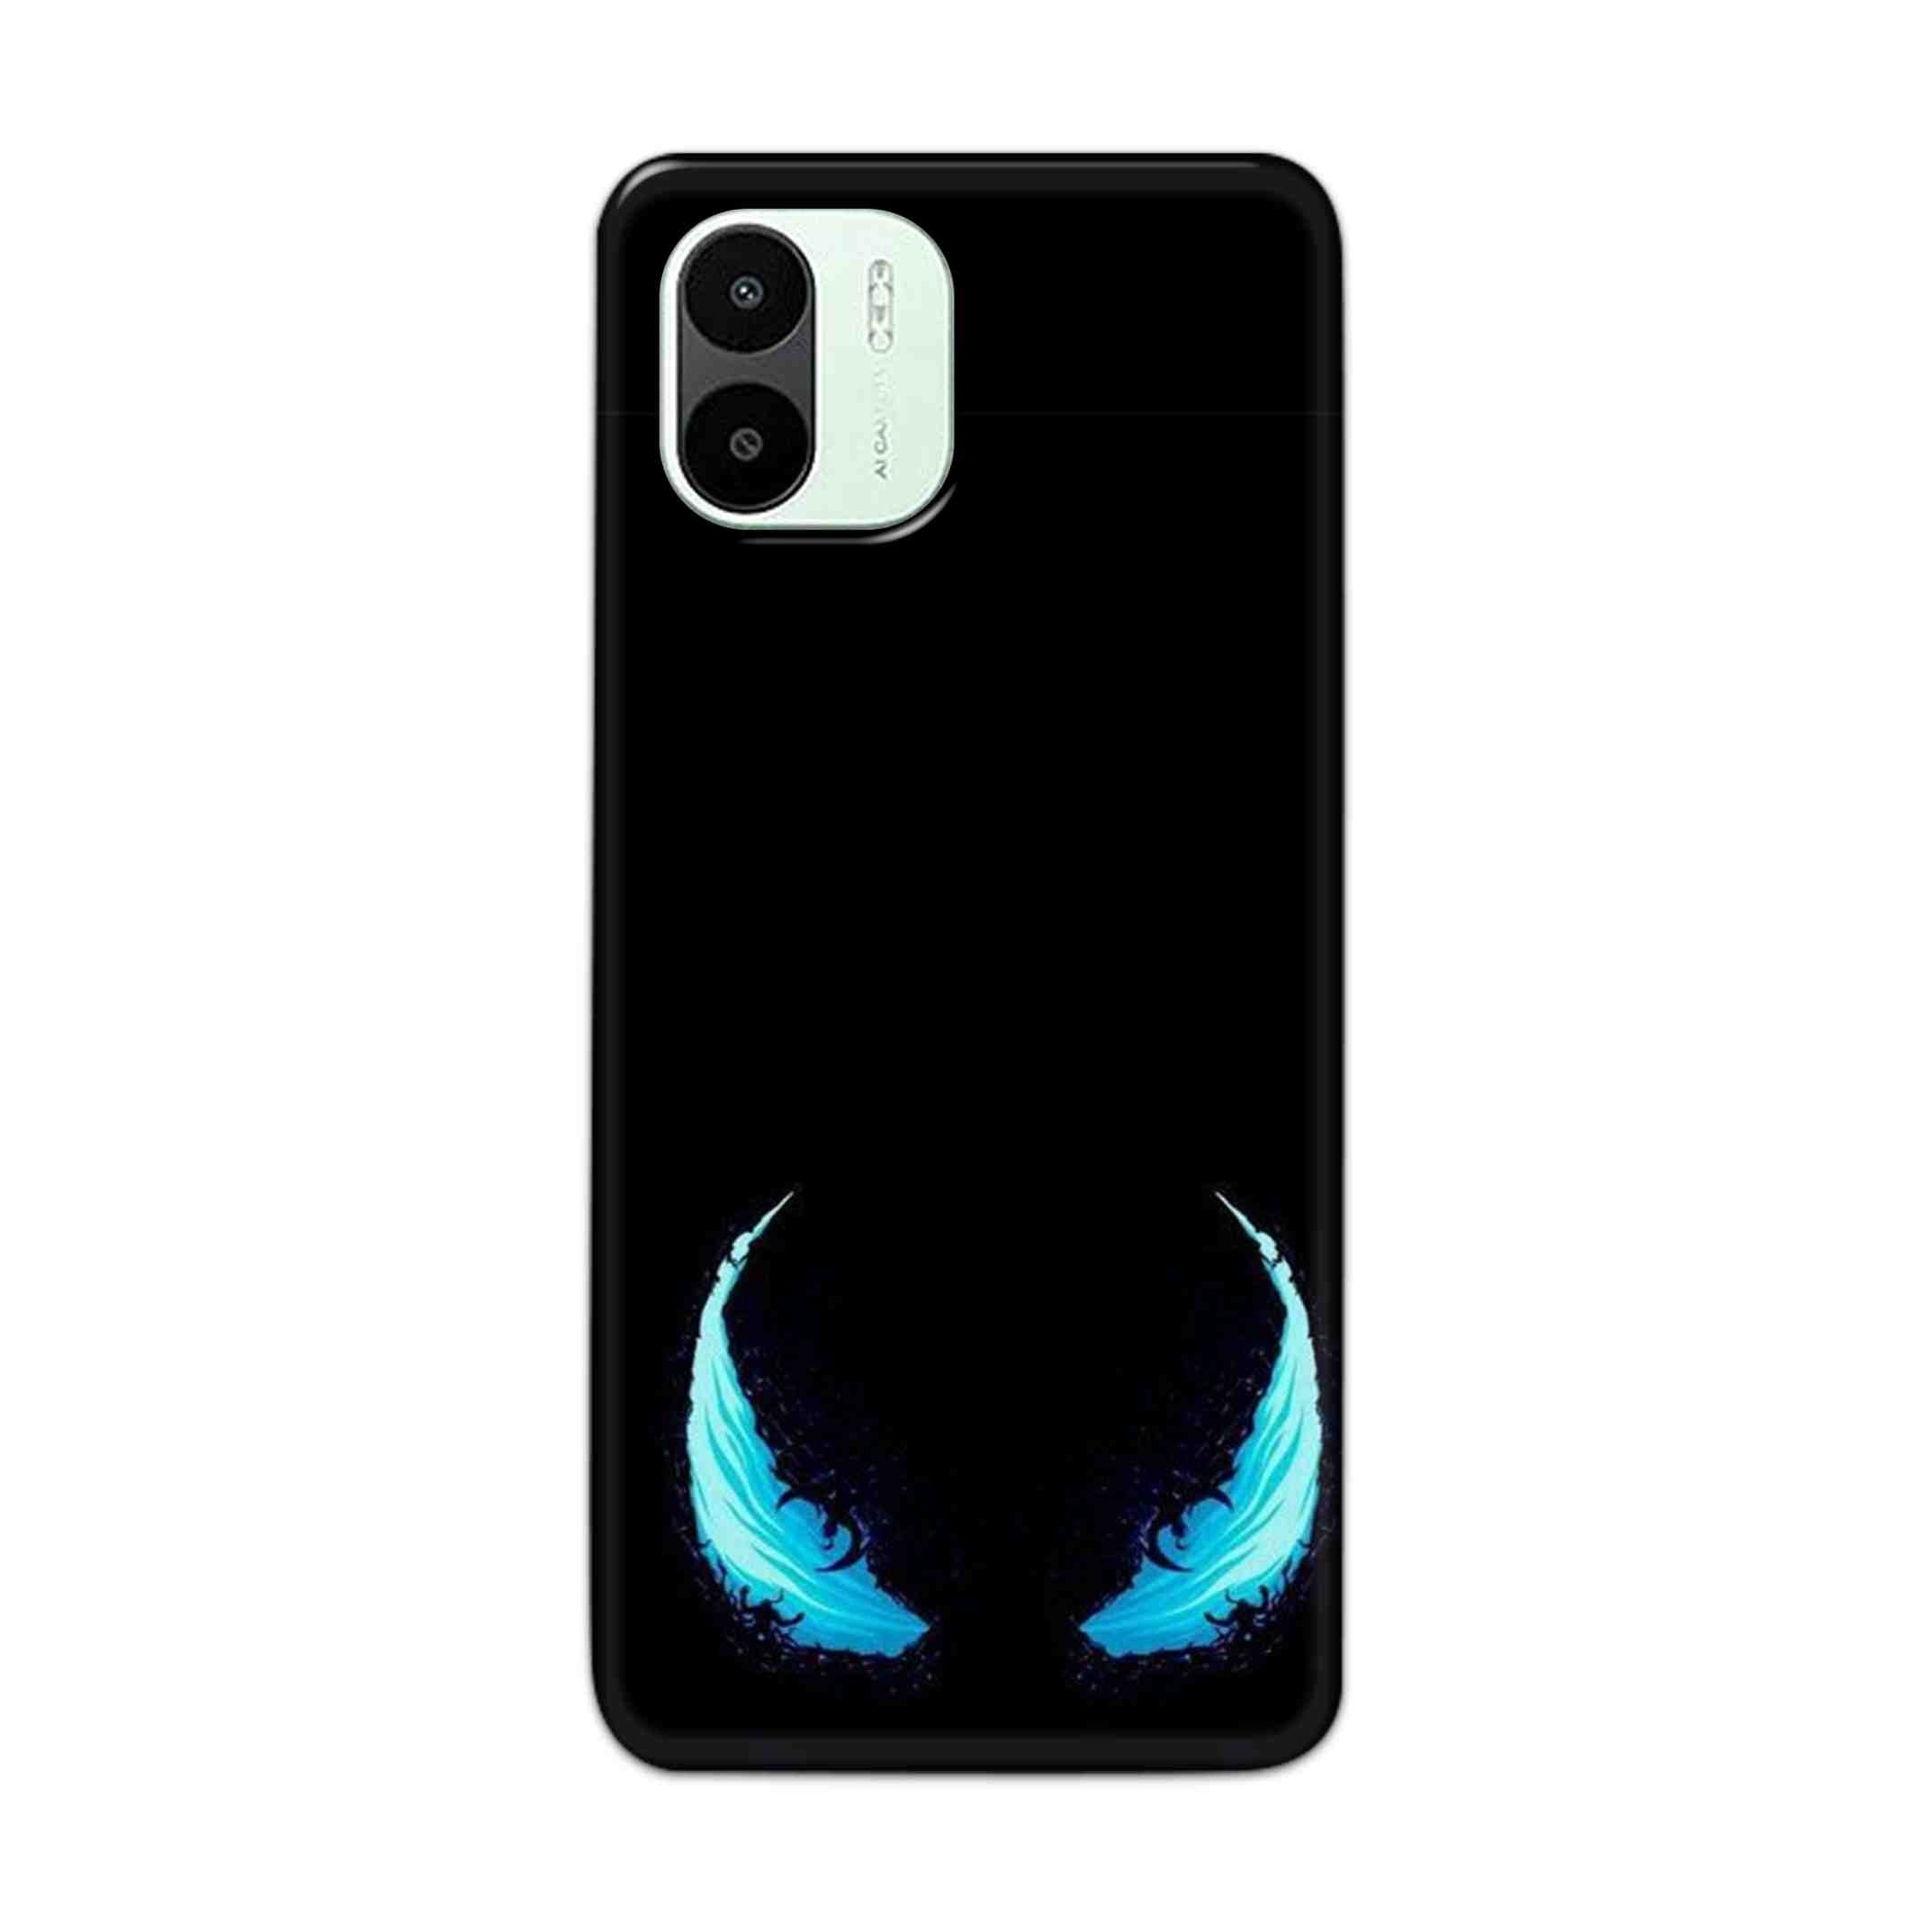 Buy Venom Eyes Hard Back Mobile Phone Case Cover For Xiaomi Redmi A1 5G Online